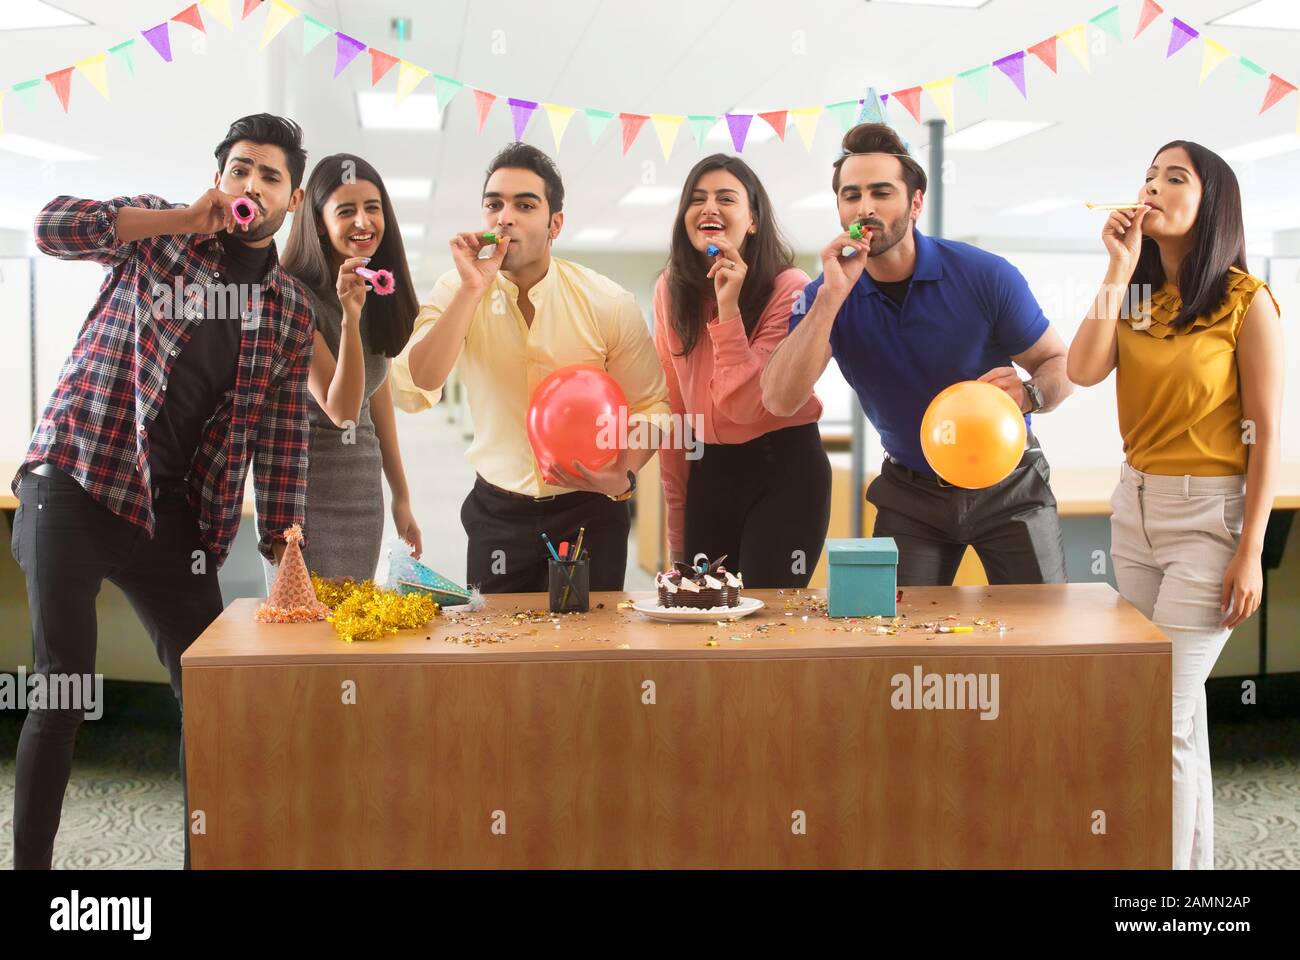 Group of colleagues blowing party hooters during a celebration in office. Stock Photo